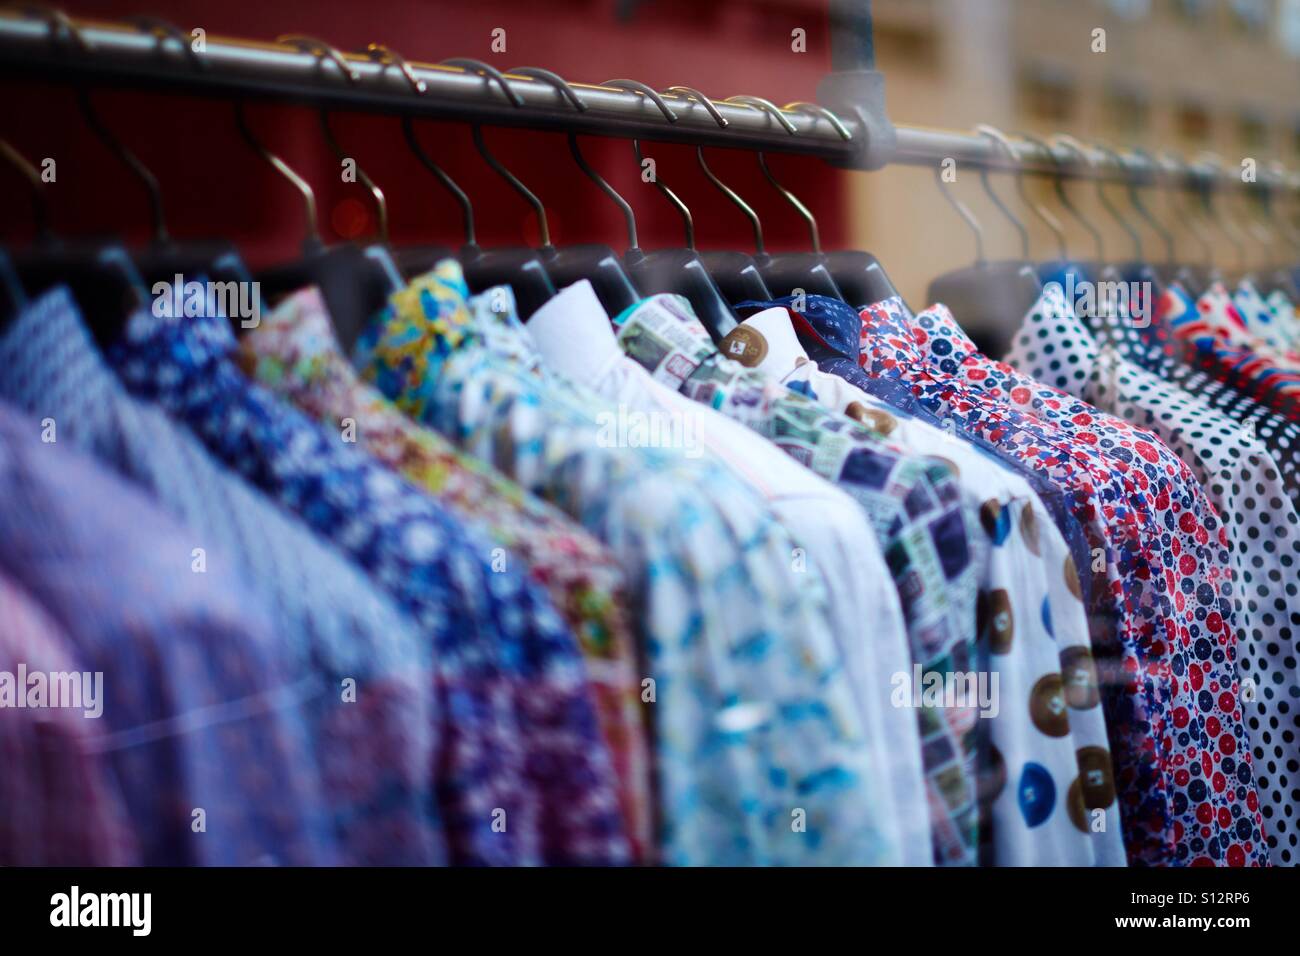 Close-up of a shop rail full of colourful patterned shirts for sale. Stock Photo